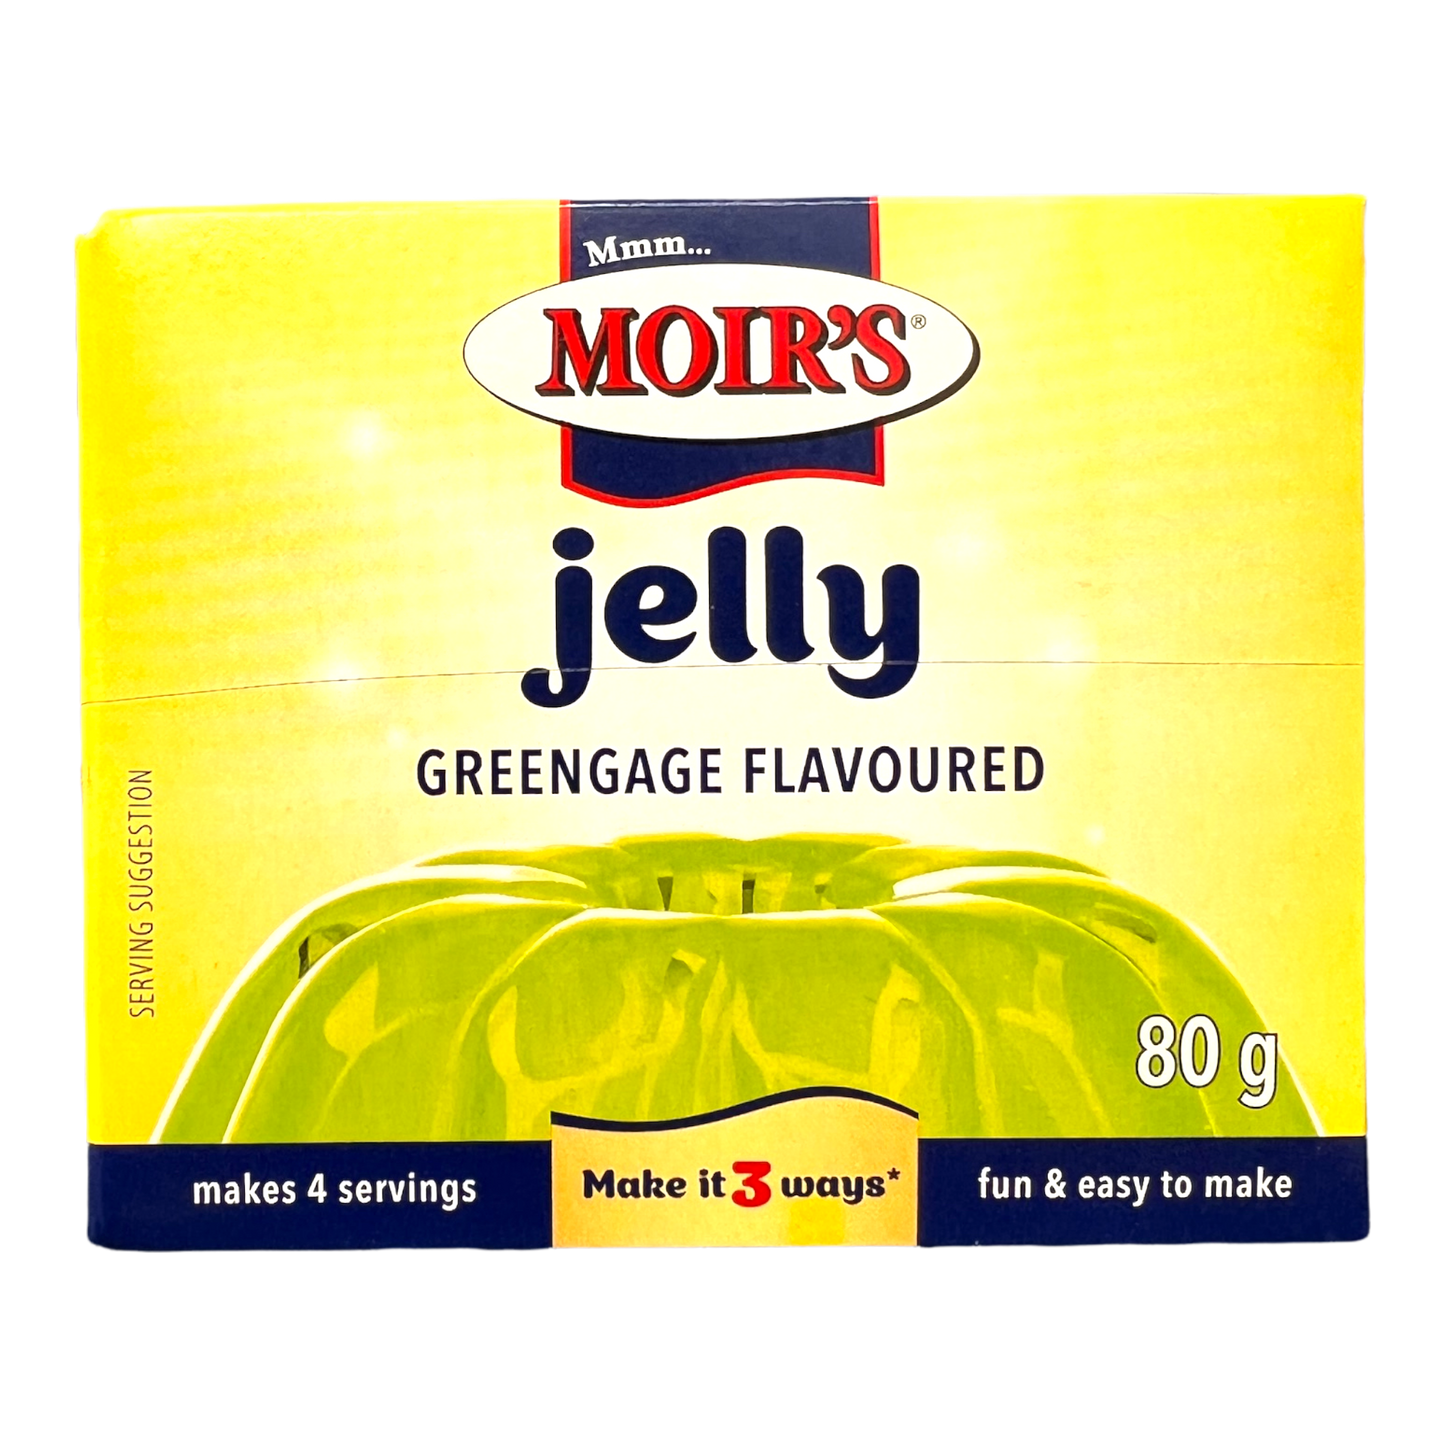 Moir's Greengage Flavour Jelly 80g [South African]